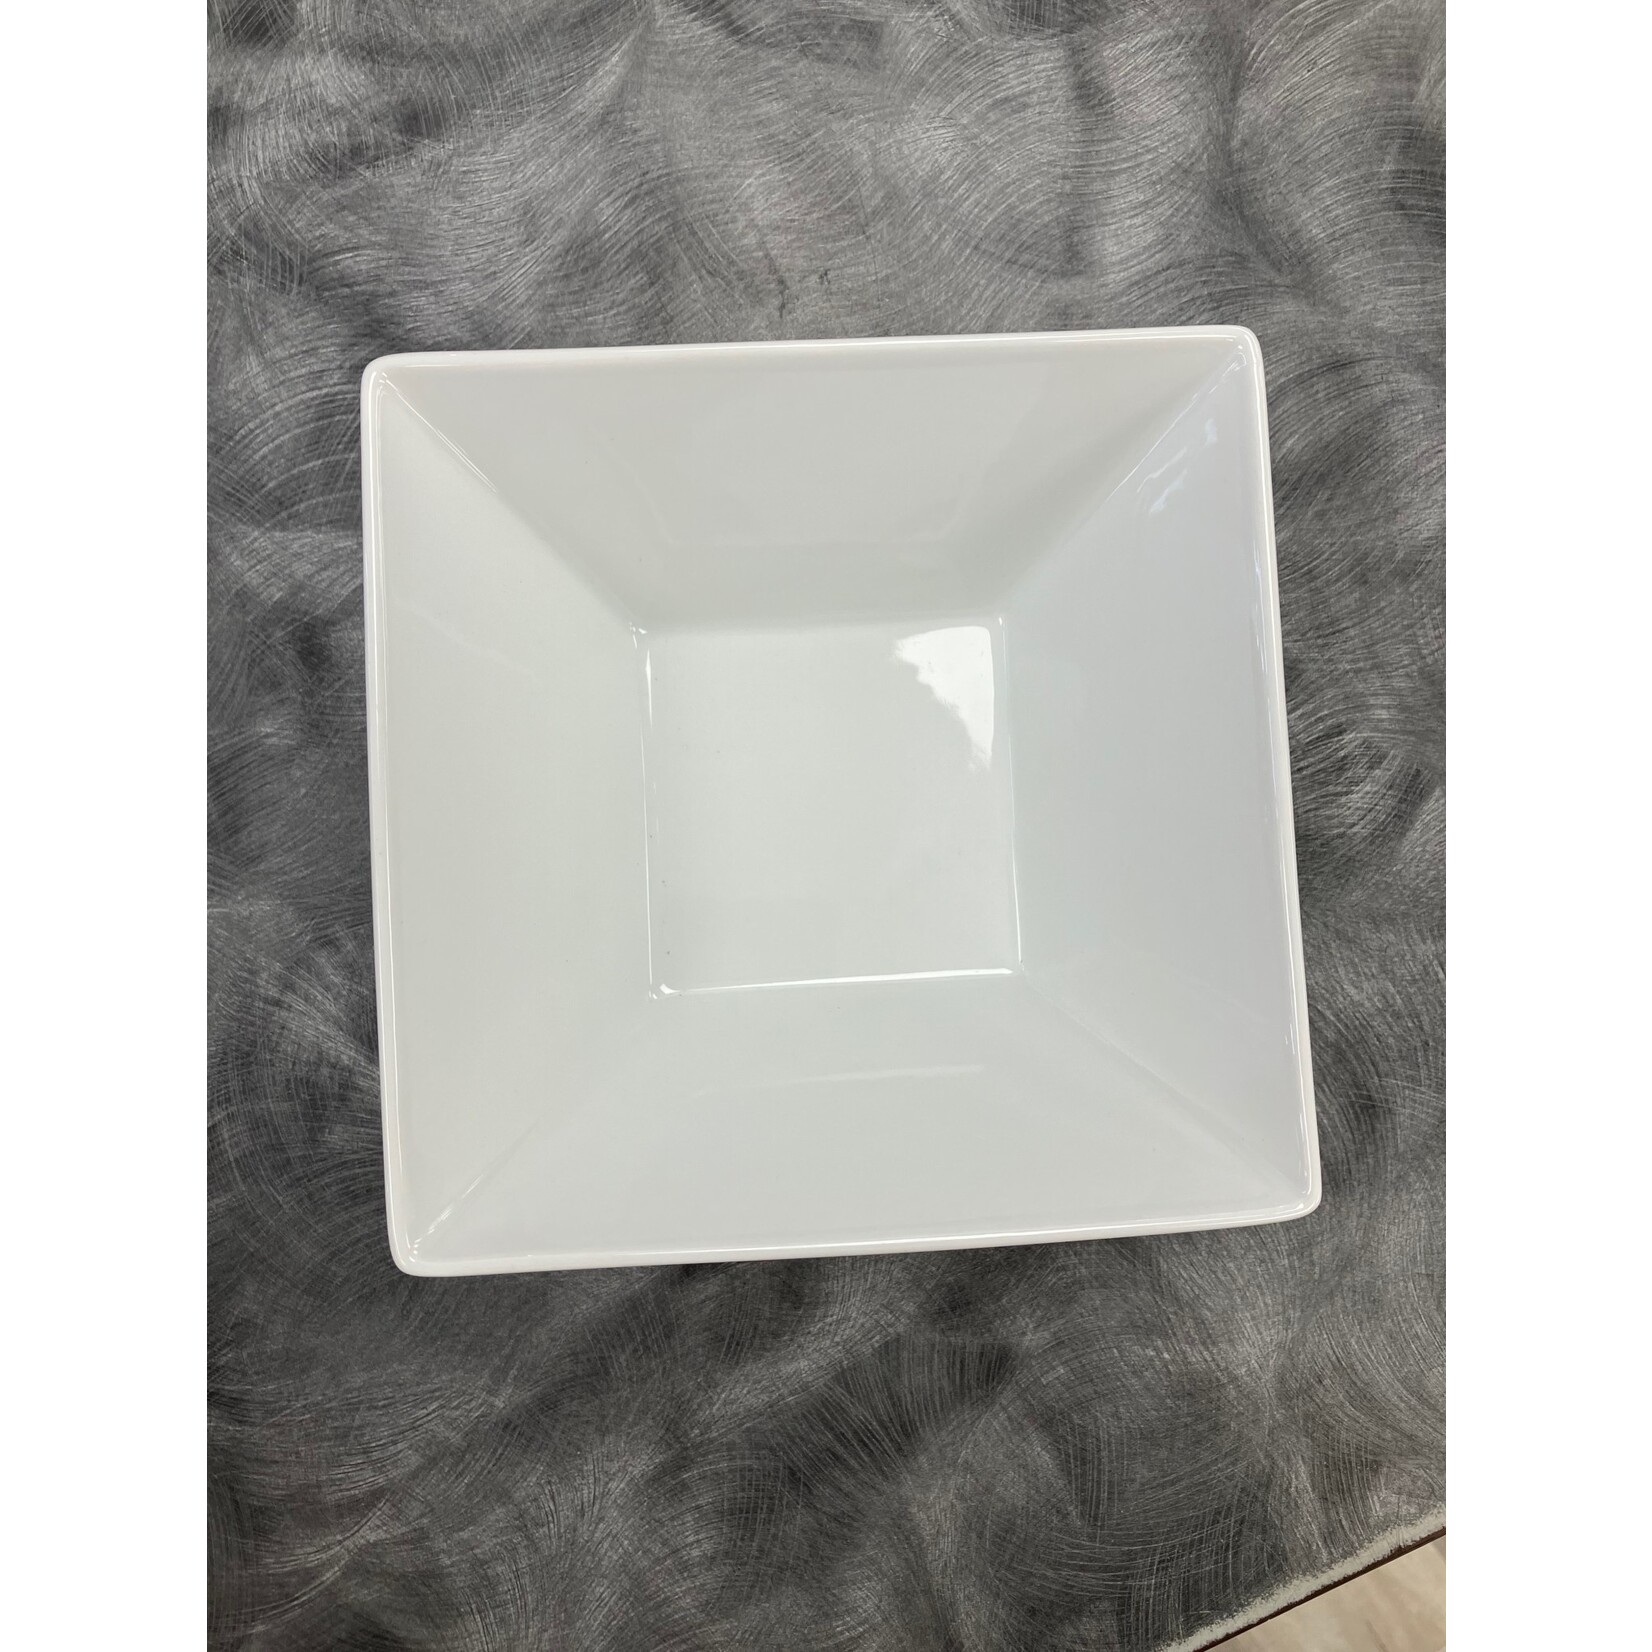 Palate and Plate AW-1735 6.75" square bowl 30 oz 24/case